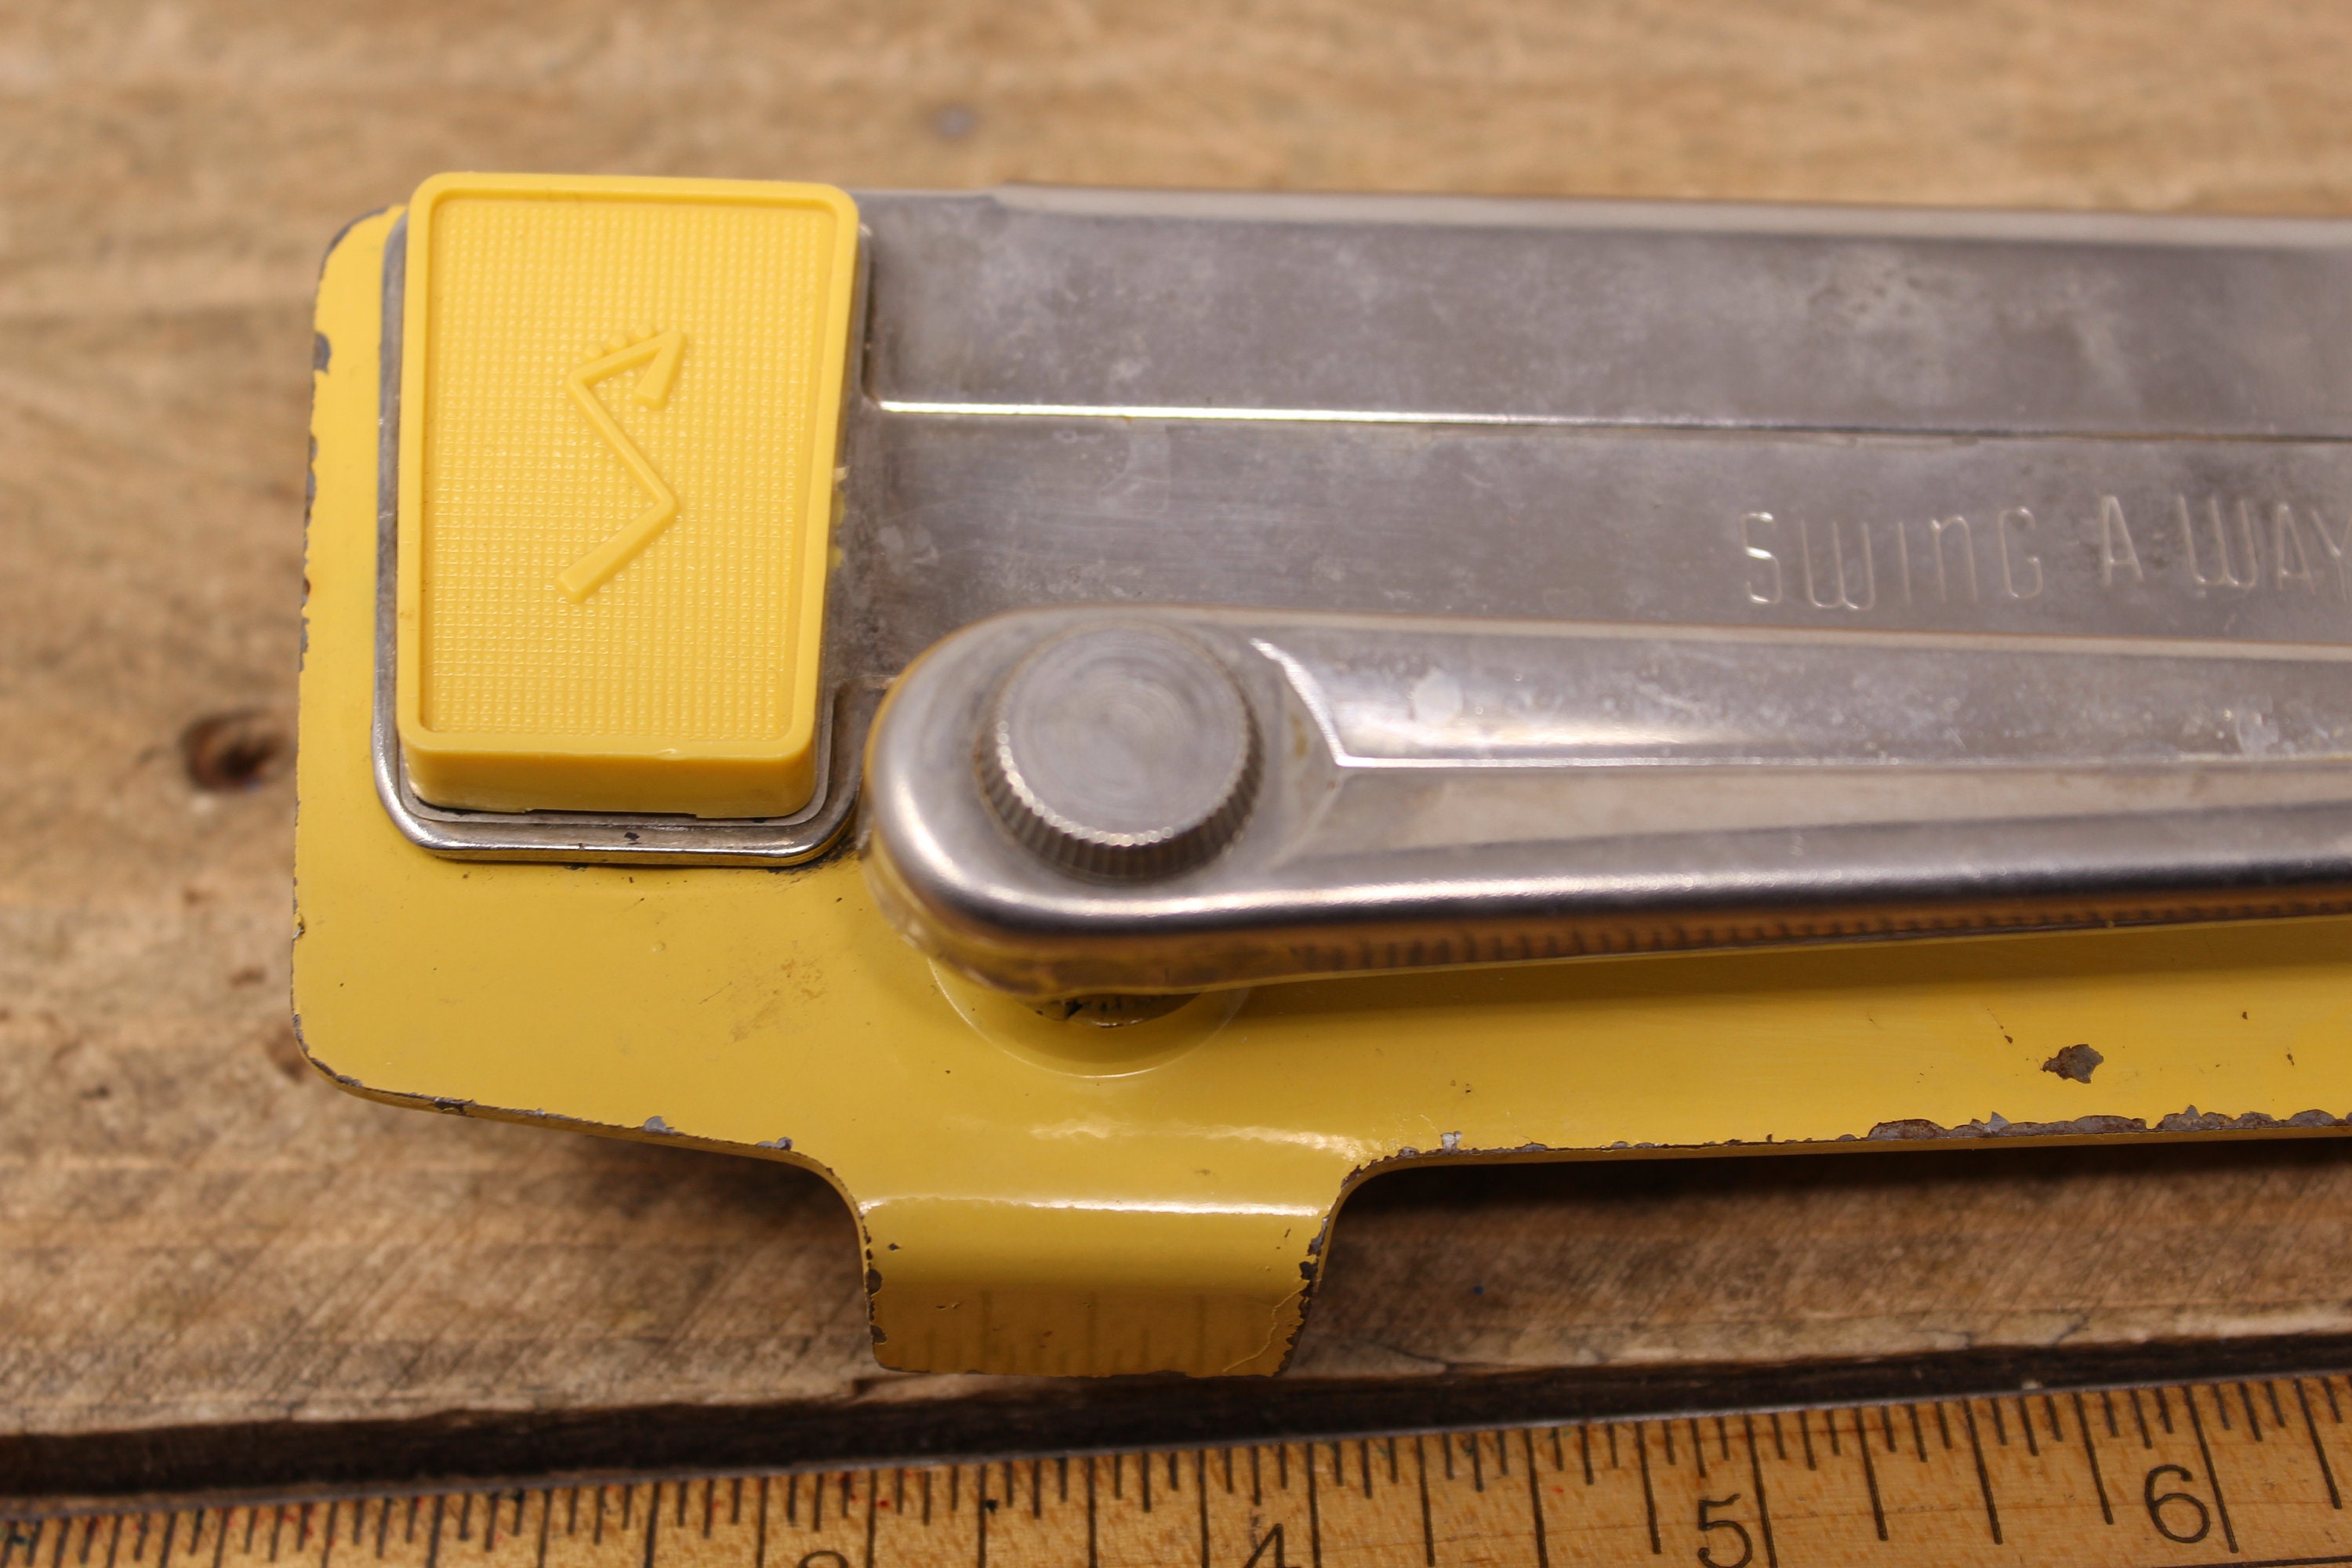 Classic Vintage 1960s Mustard Yellow Swing-a-way Can Opener